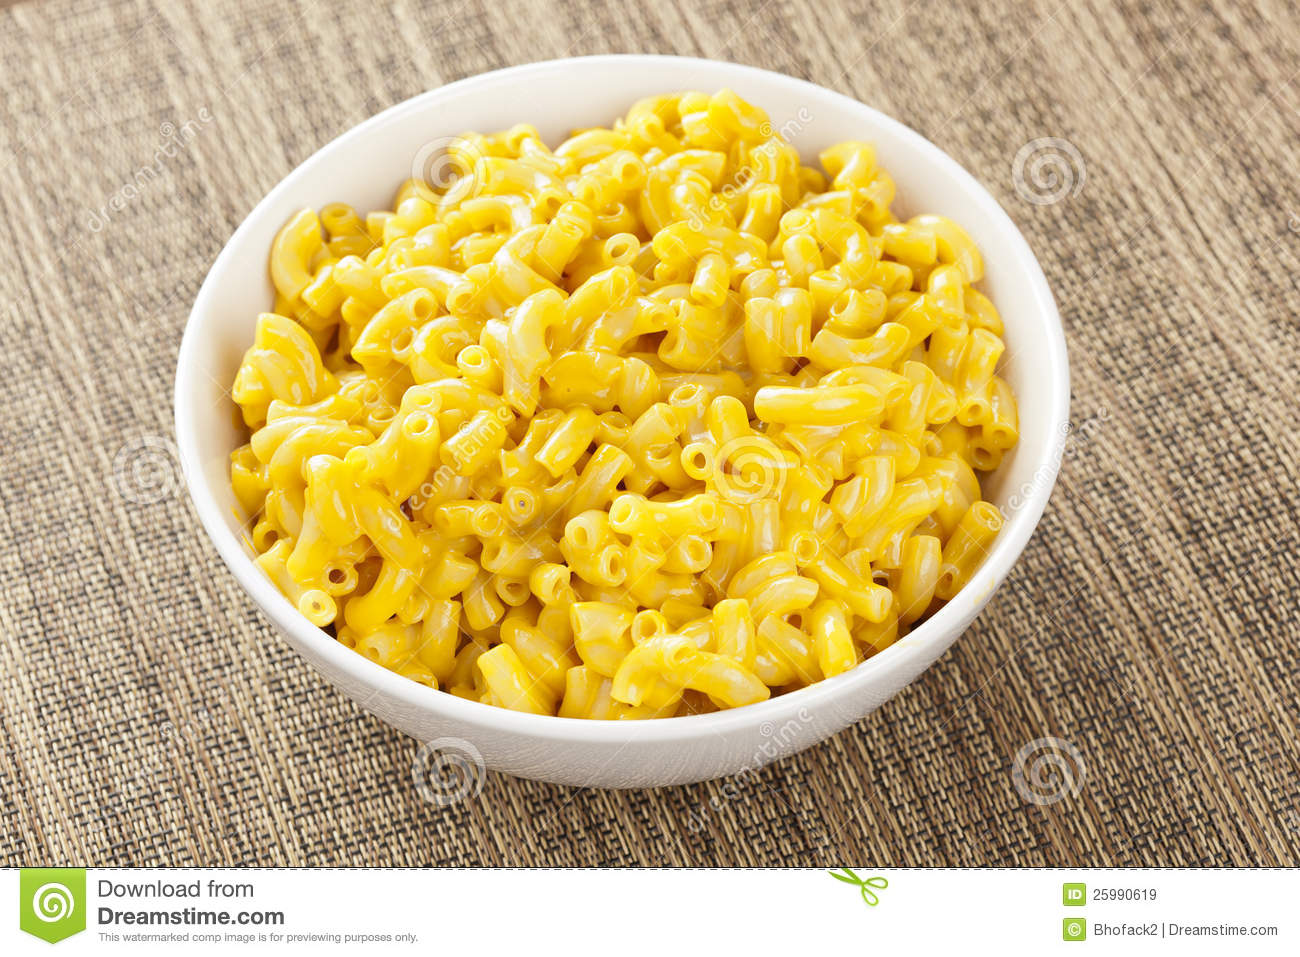 Macaroni And Cheese In A Bowl Royalty Free Stock Images   Image    